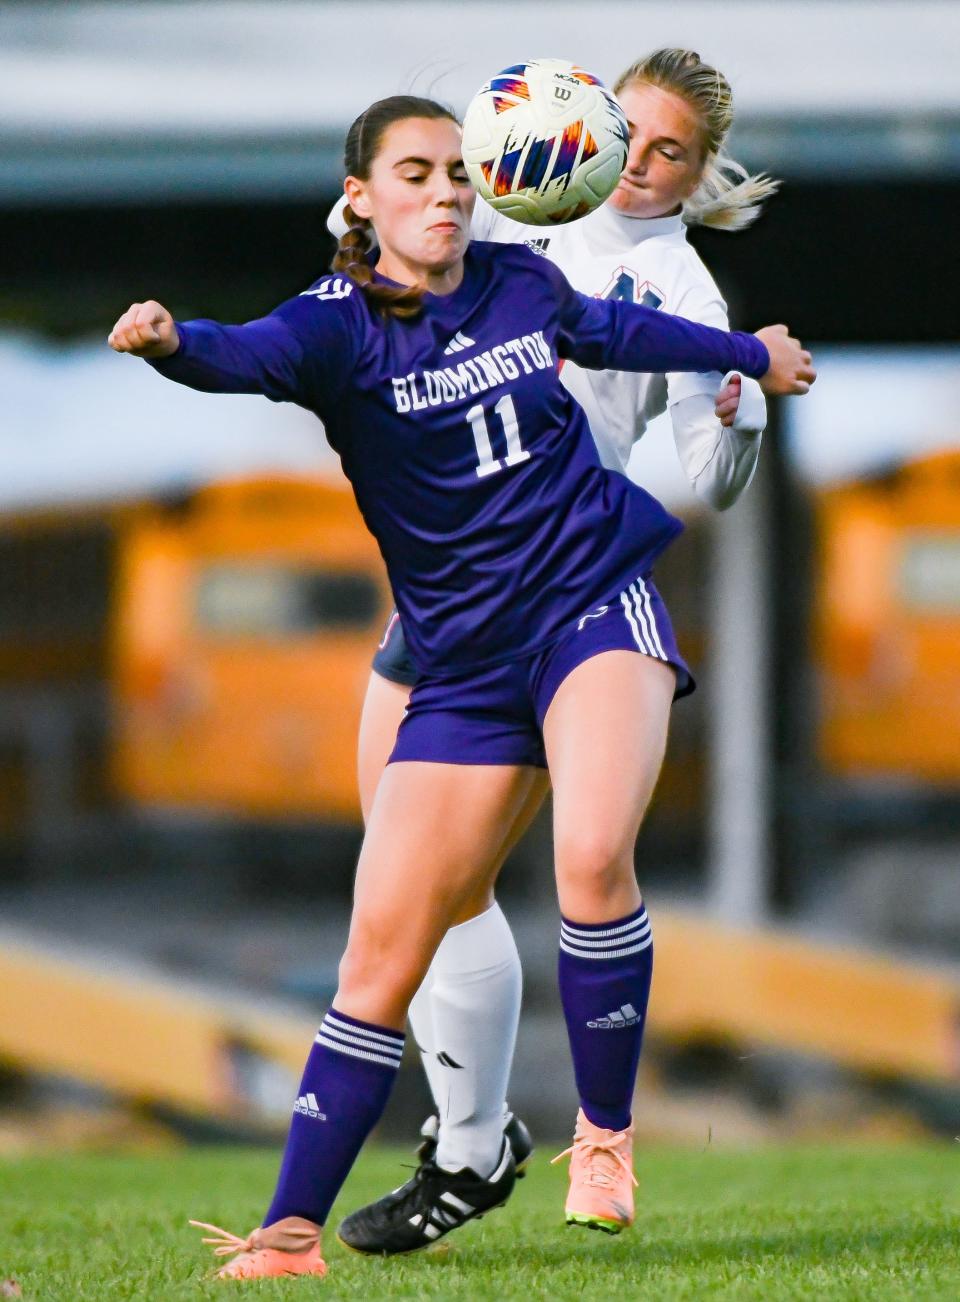 Bloomington South’s Maddie Talbott (11) and Terre Haute North’s Alyse Thompson battle for possession of the ball during the IHSAA Girls’ soccer sectional championship game at Bloomington South on Saturday, Oct. 7, 2023.